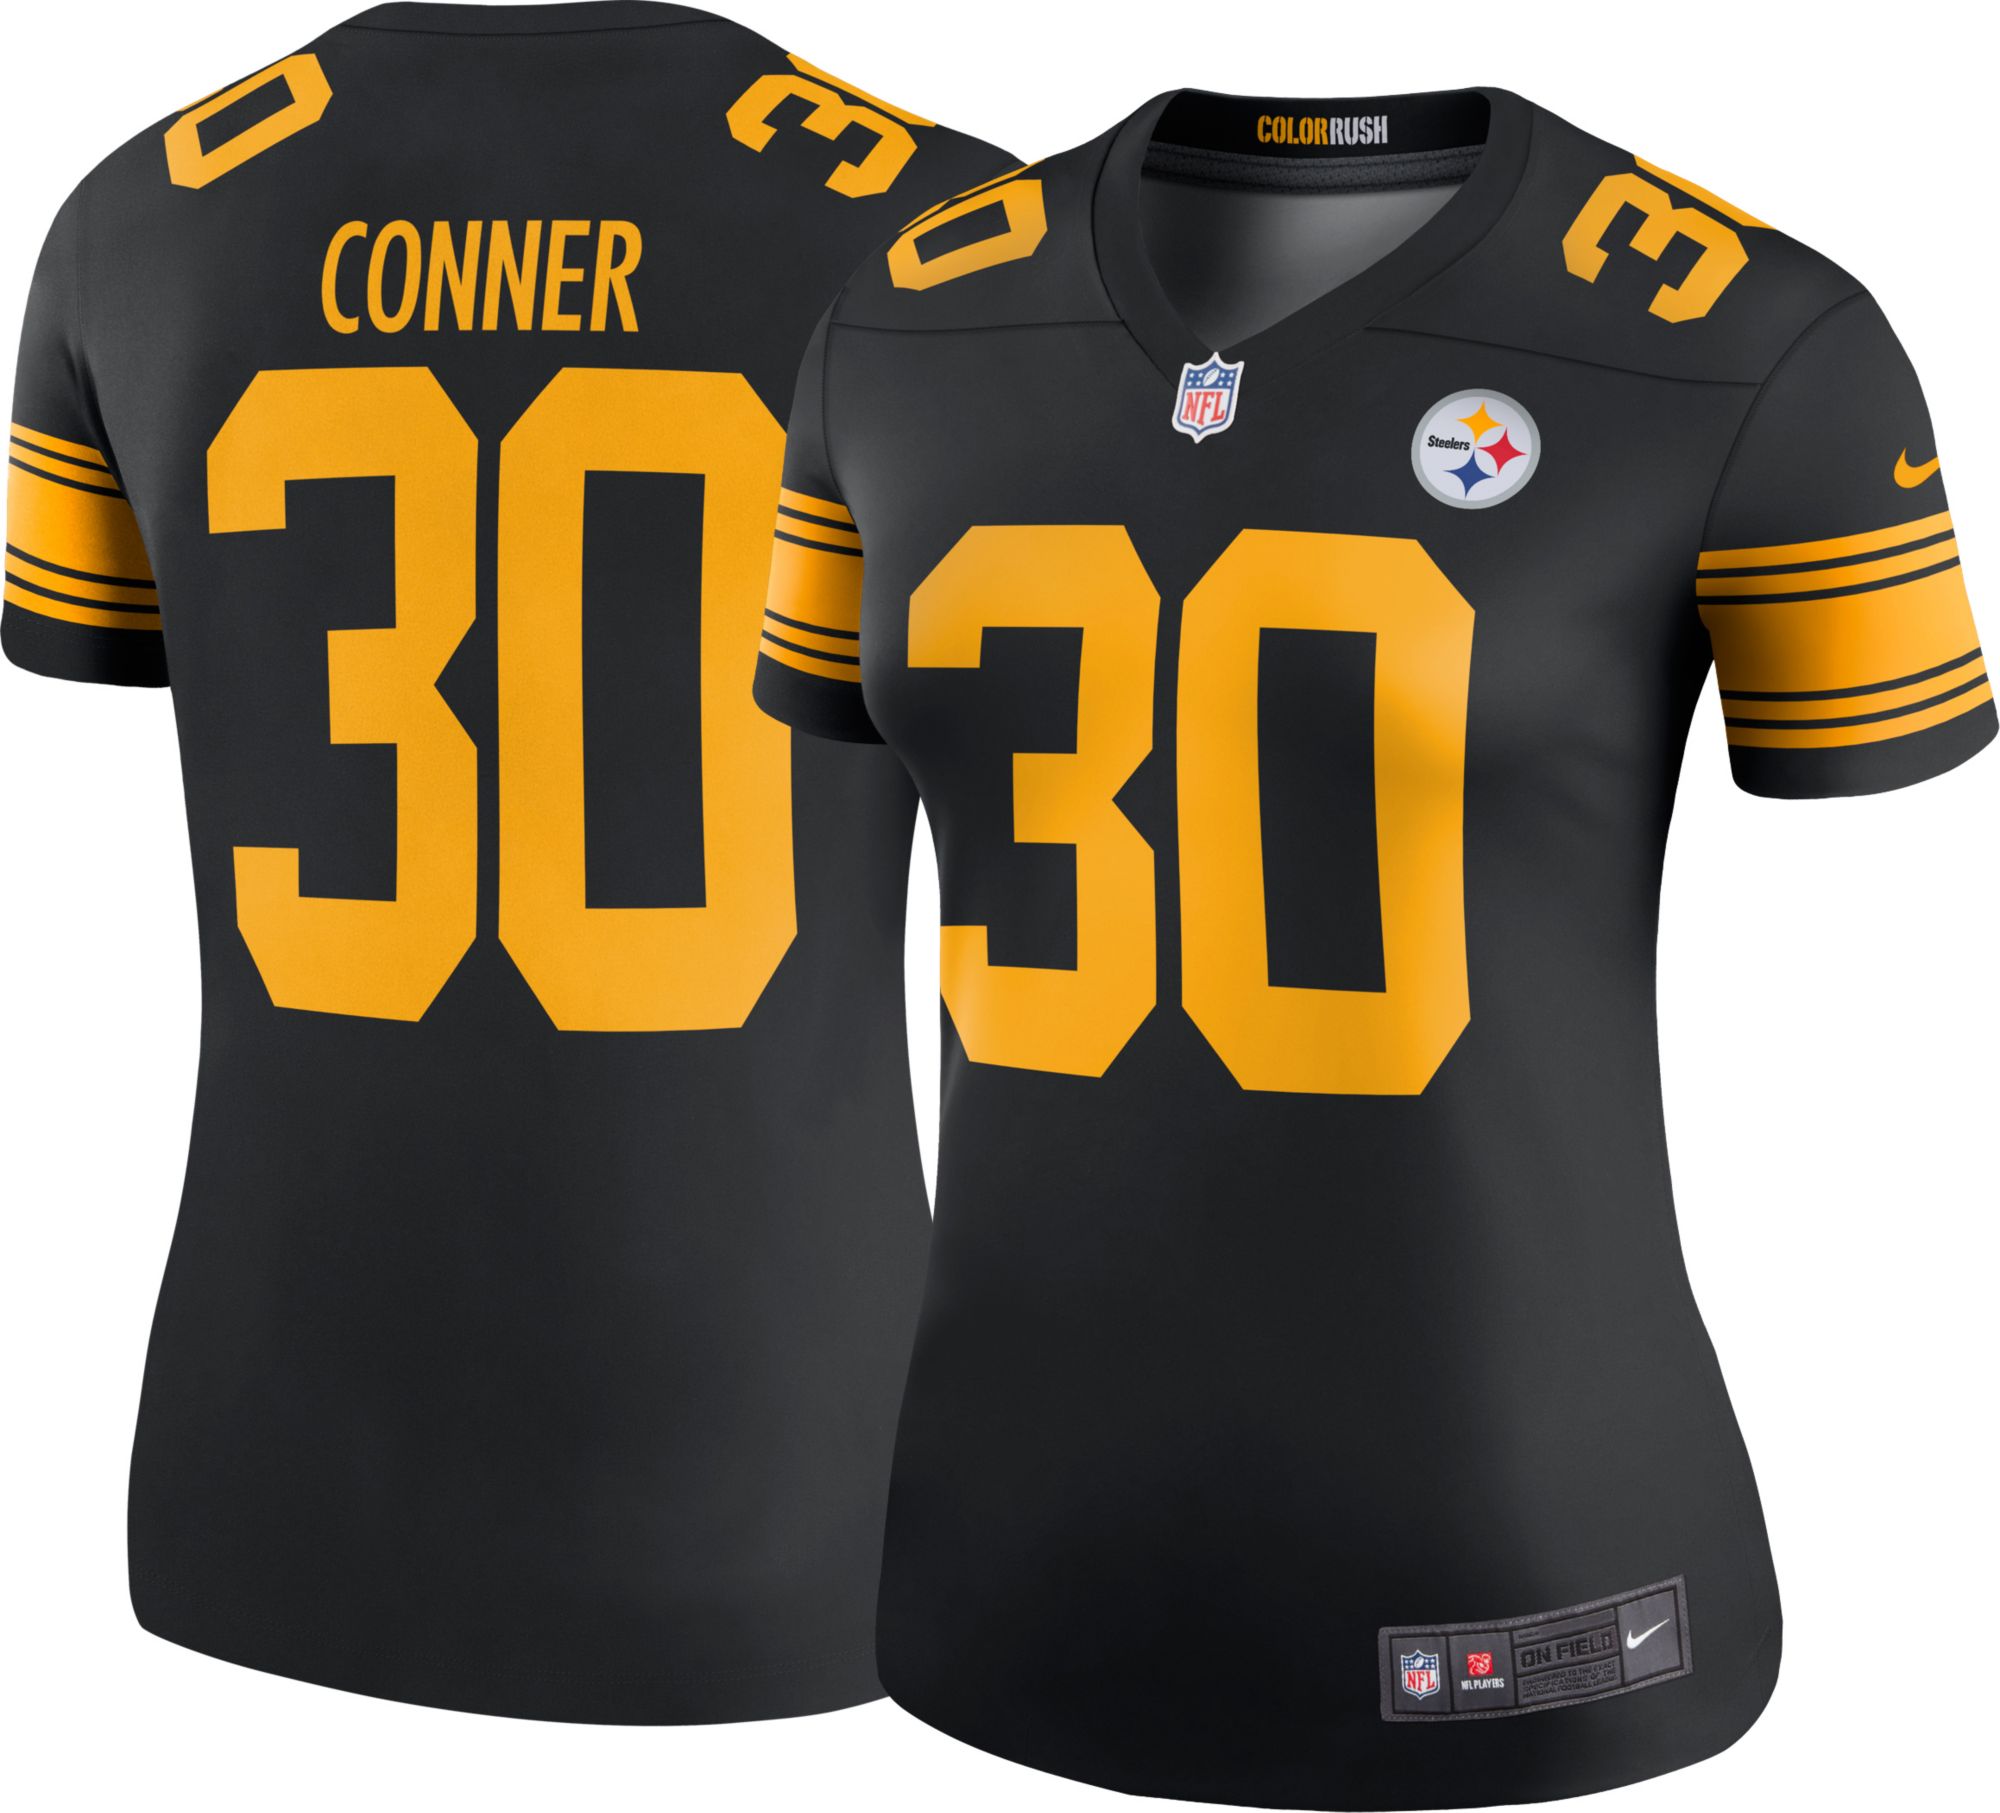 what color jersey will the steelers wear